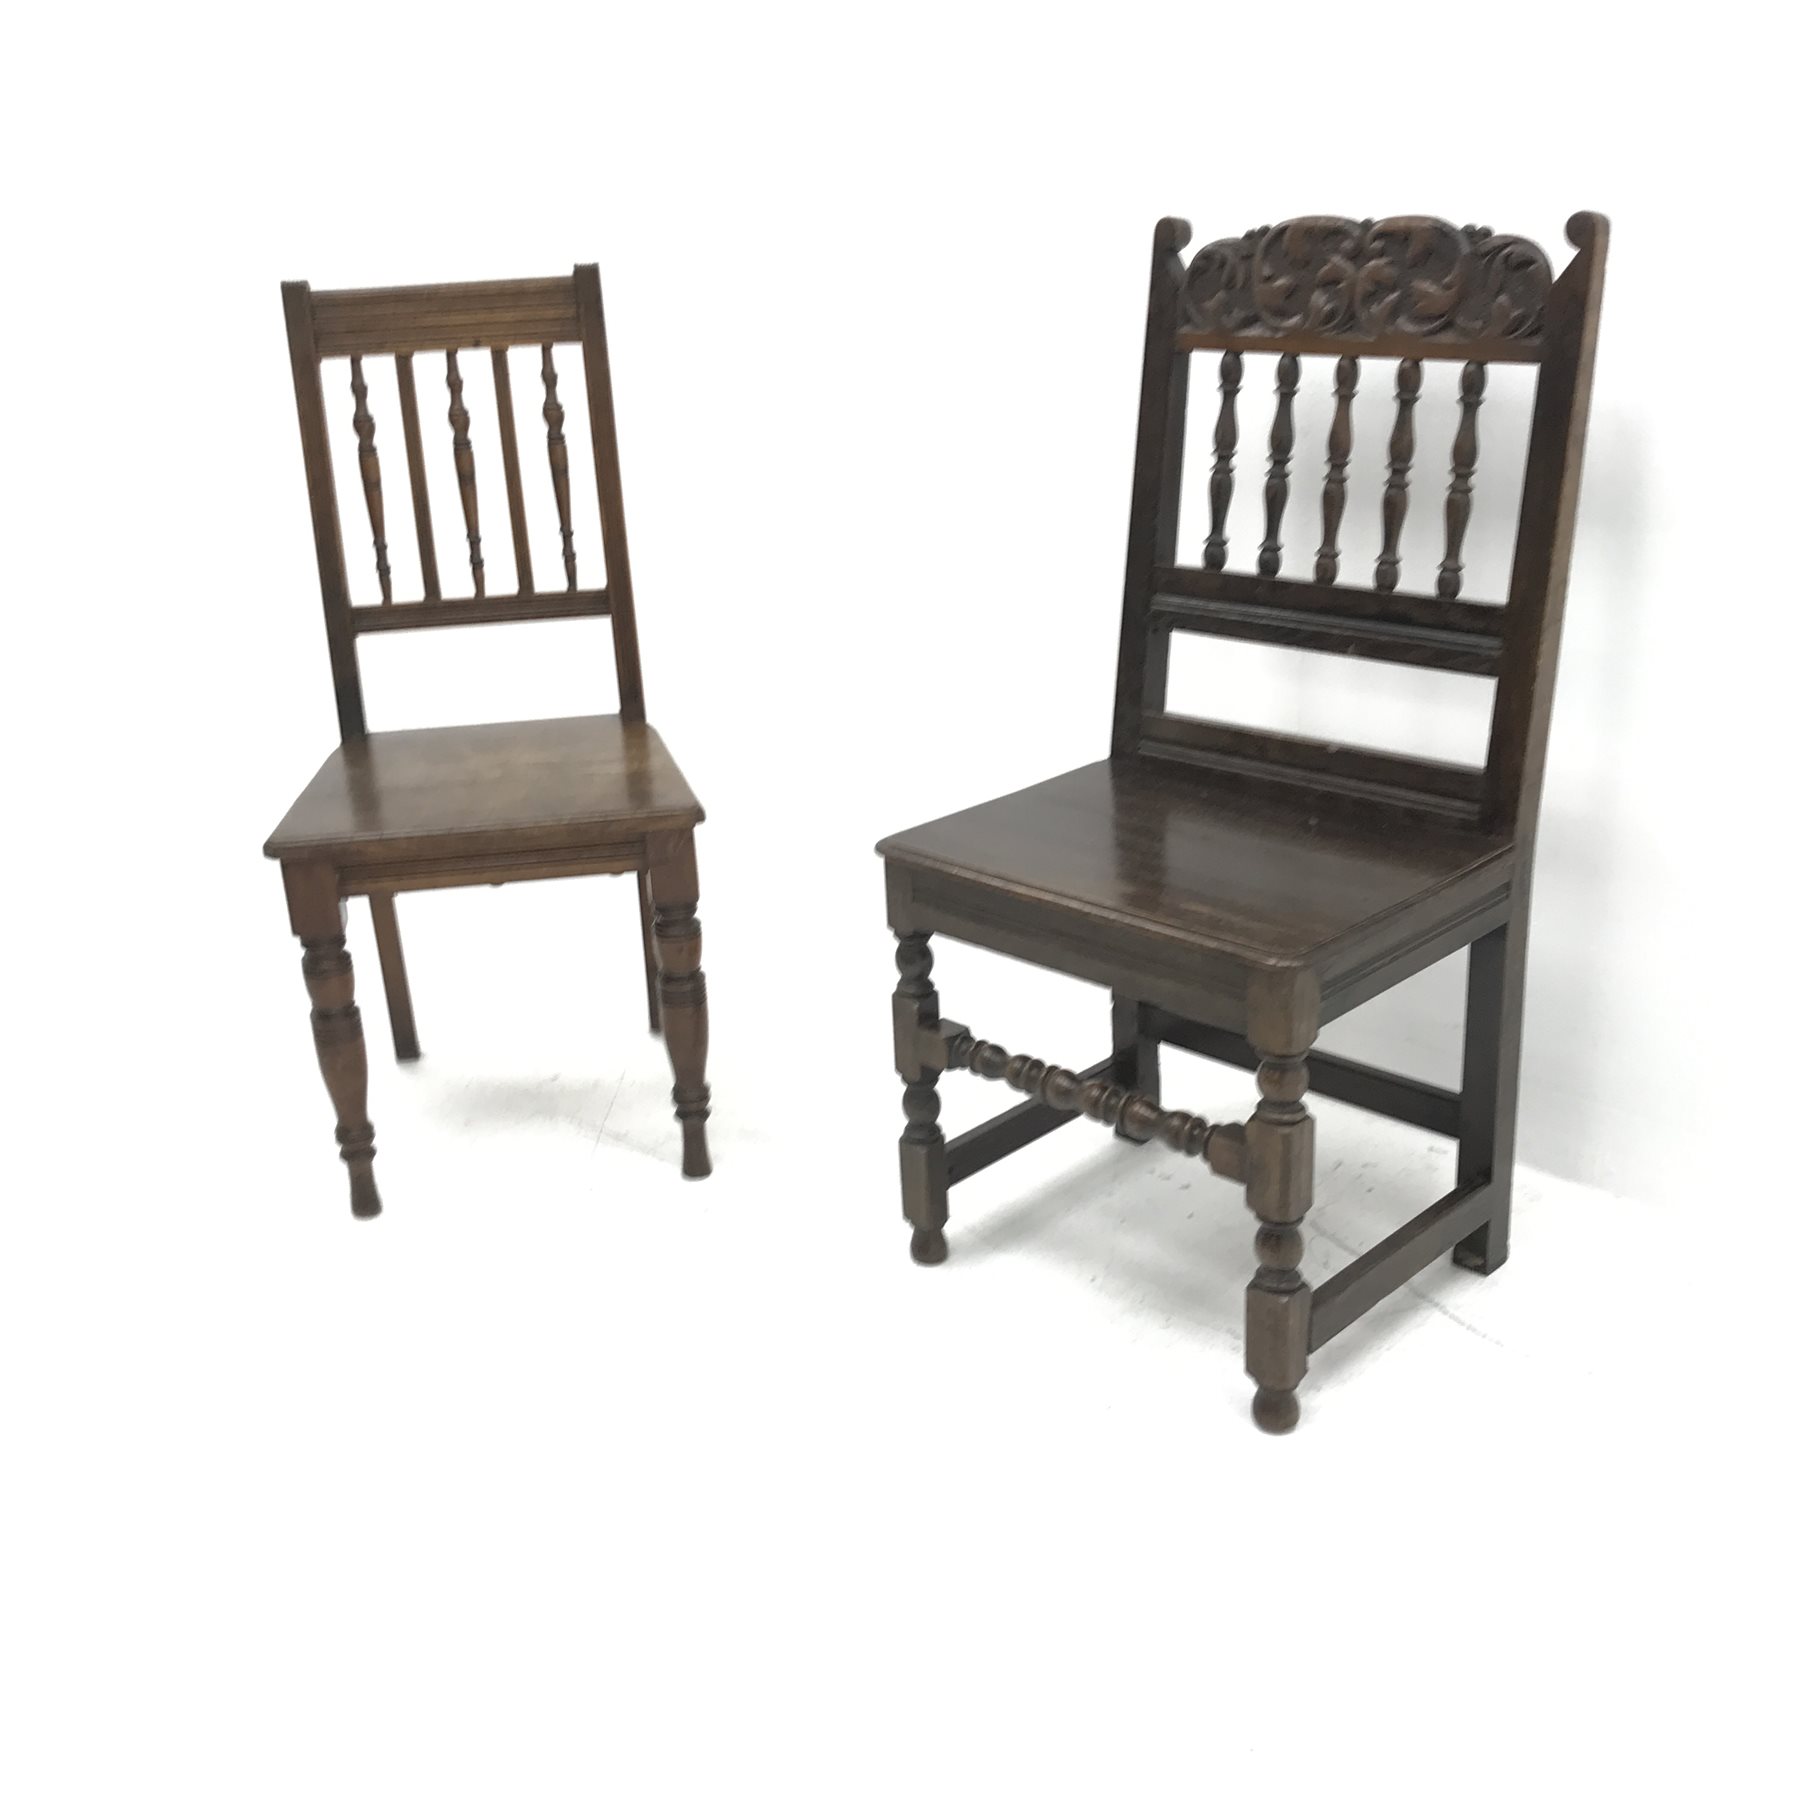 Victorian oak hall chair, carved cresting rail, solid seat (W49cm) and another similar chair (2) - Image 2 of 4